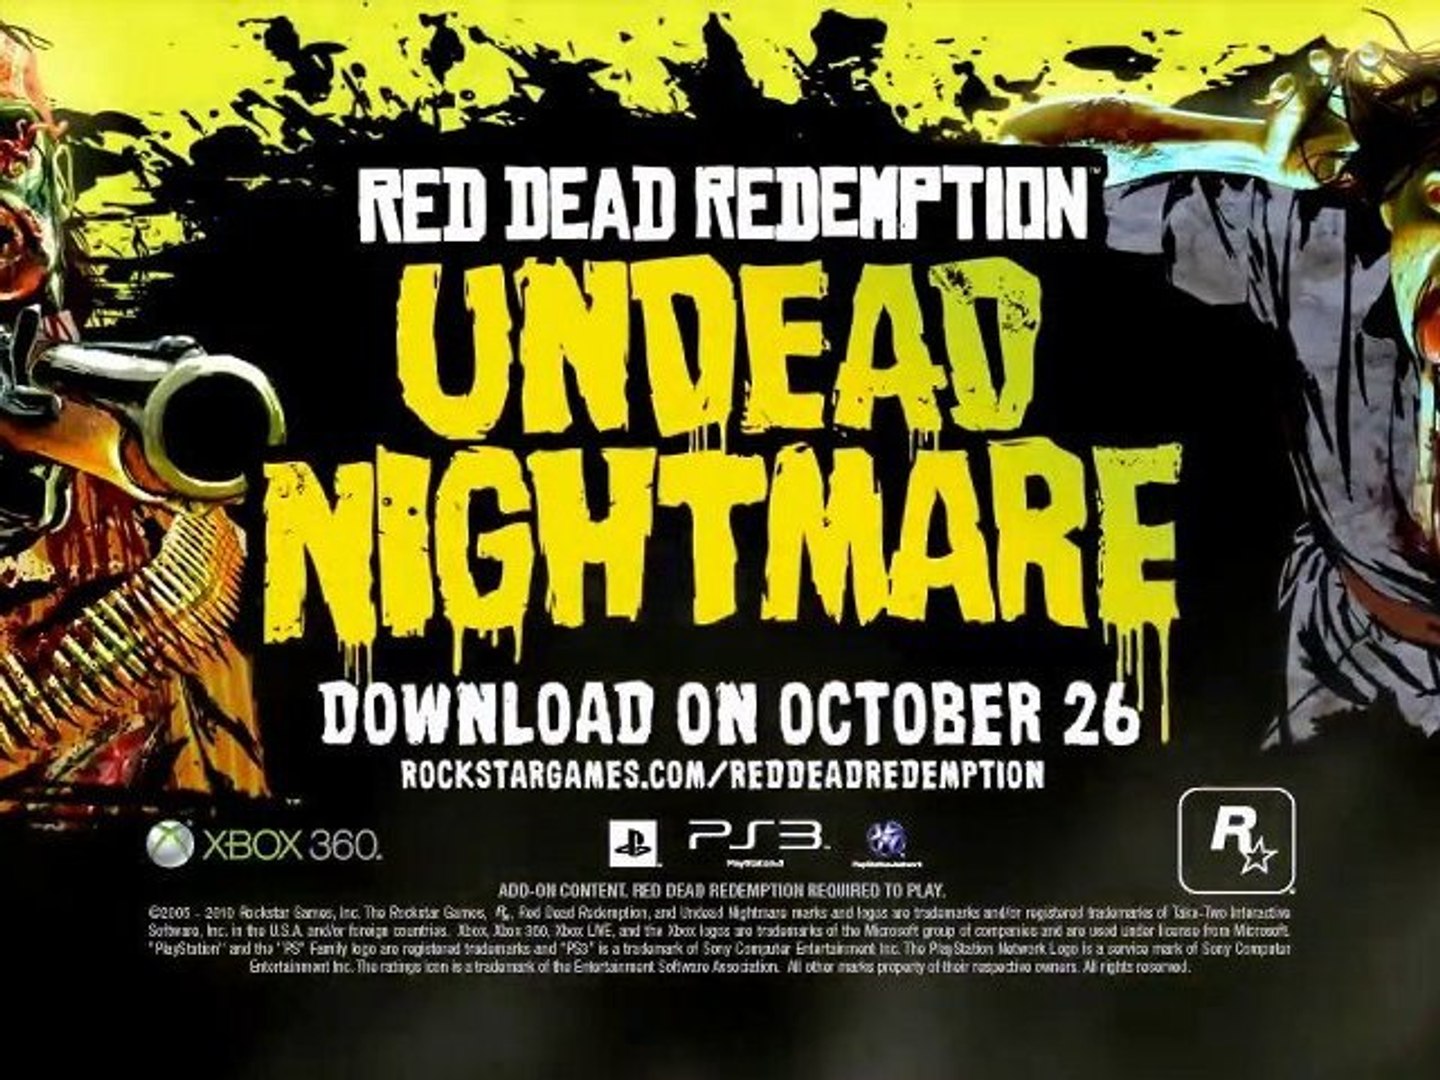 Red Dead Redemption: Undead Nightmare - Looking for Sasquatch in Tall  Trees! :) (Part 4) - video Dailymotion